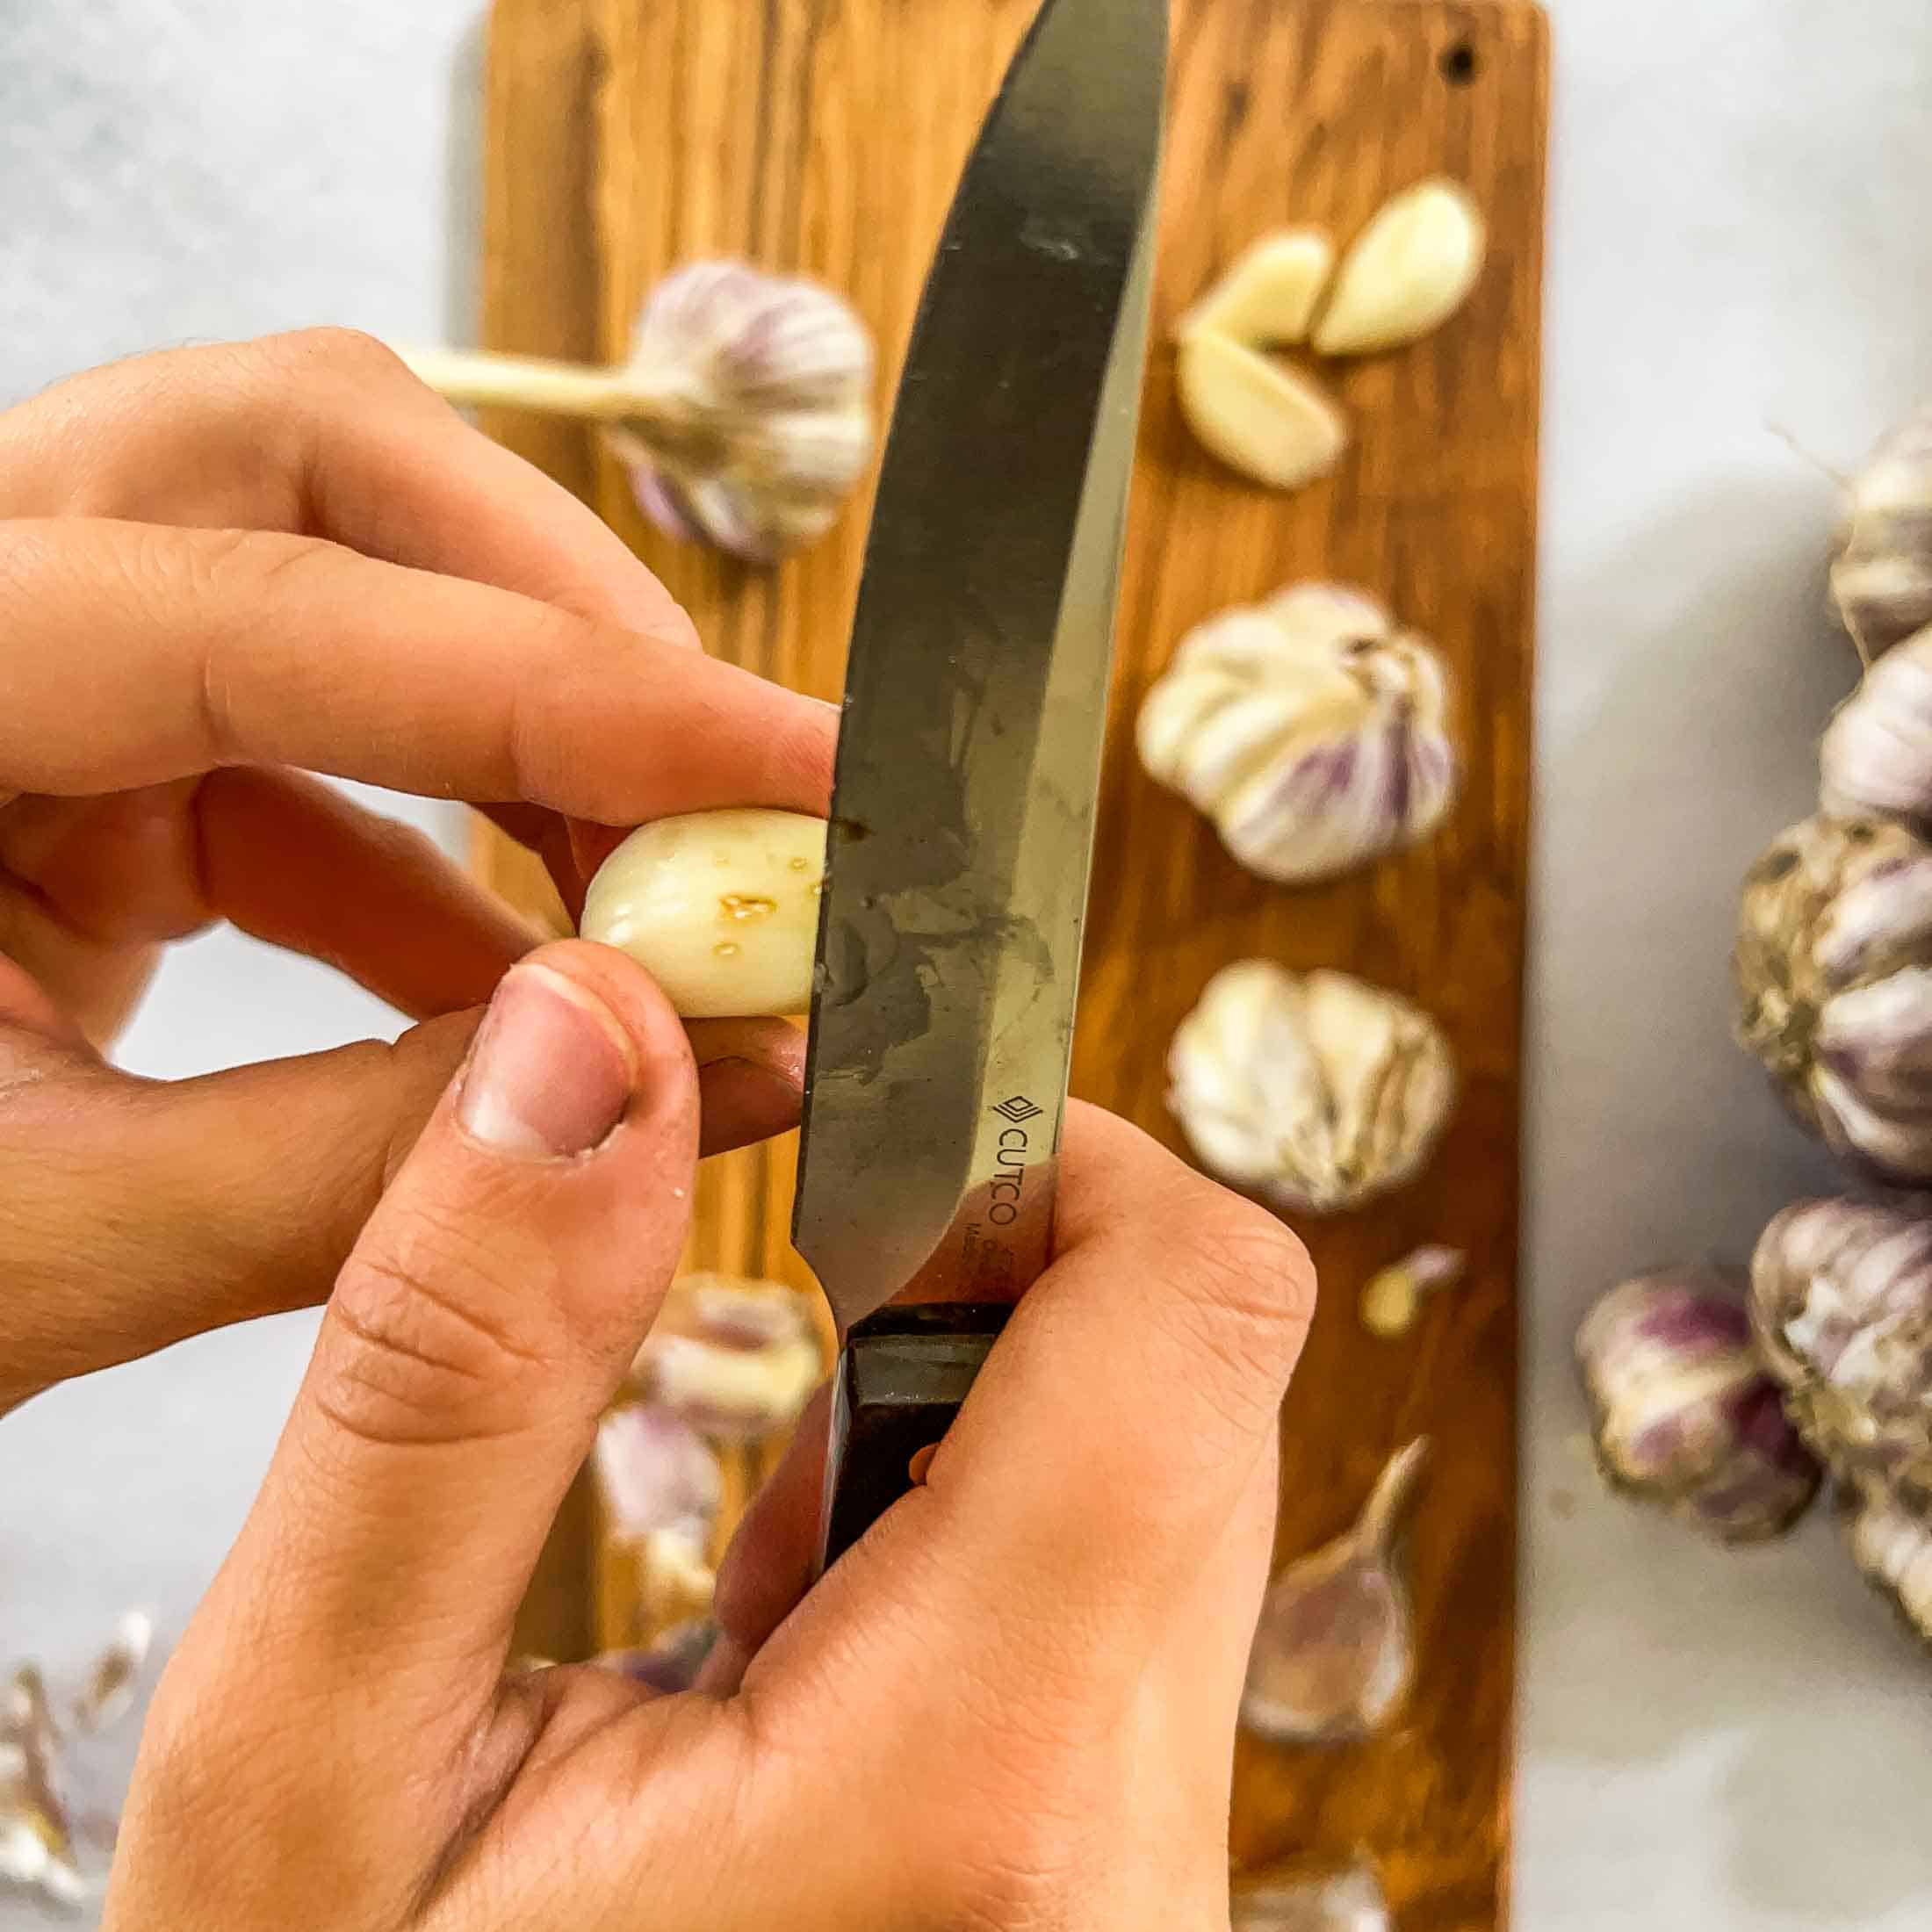 Slicing the blemishes off of a clove of garlic.